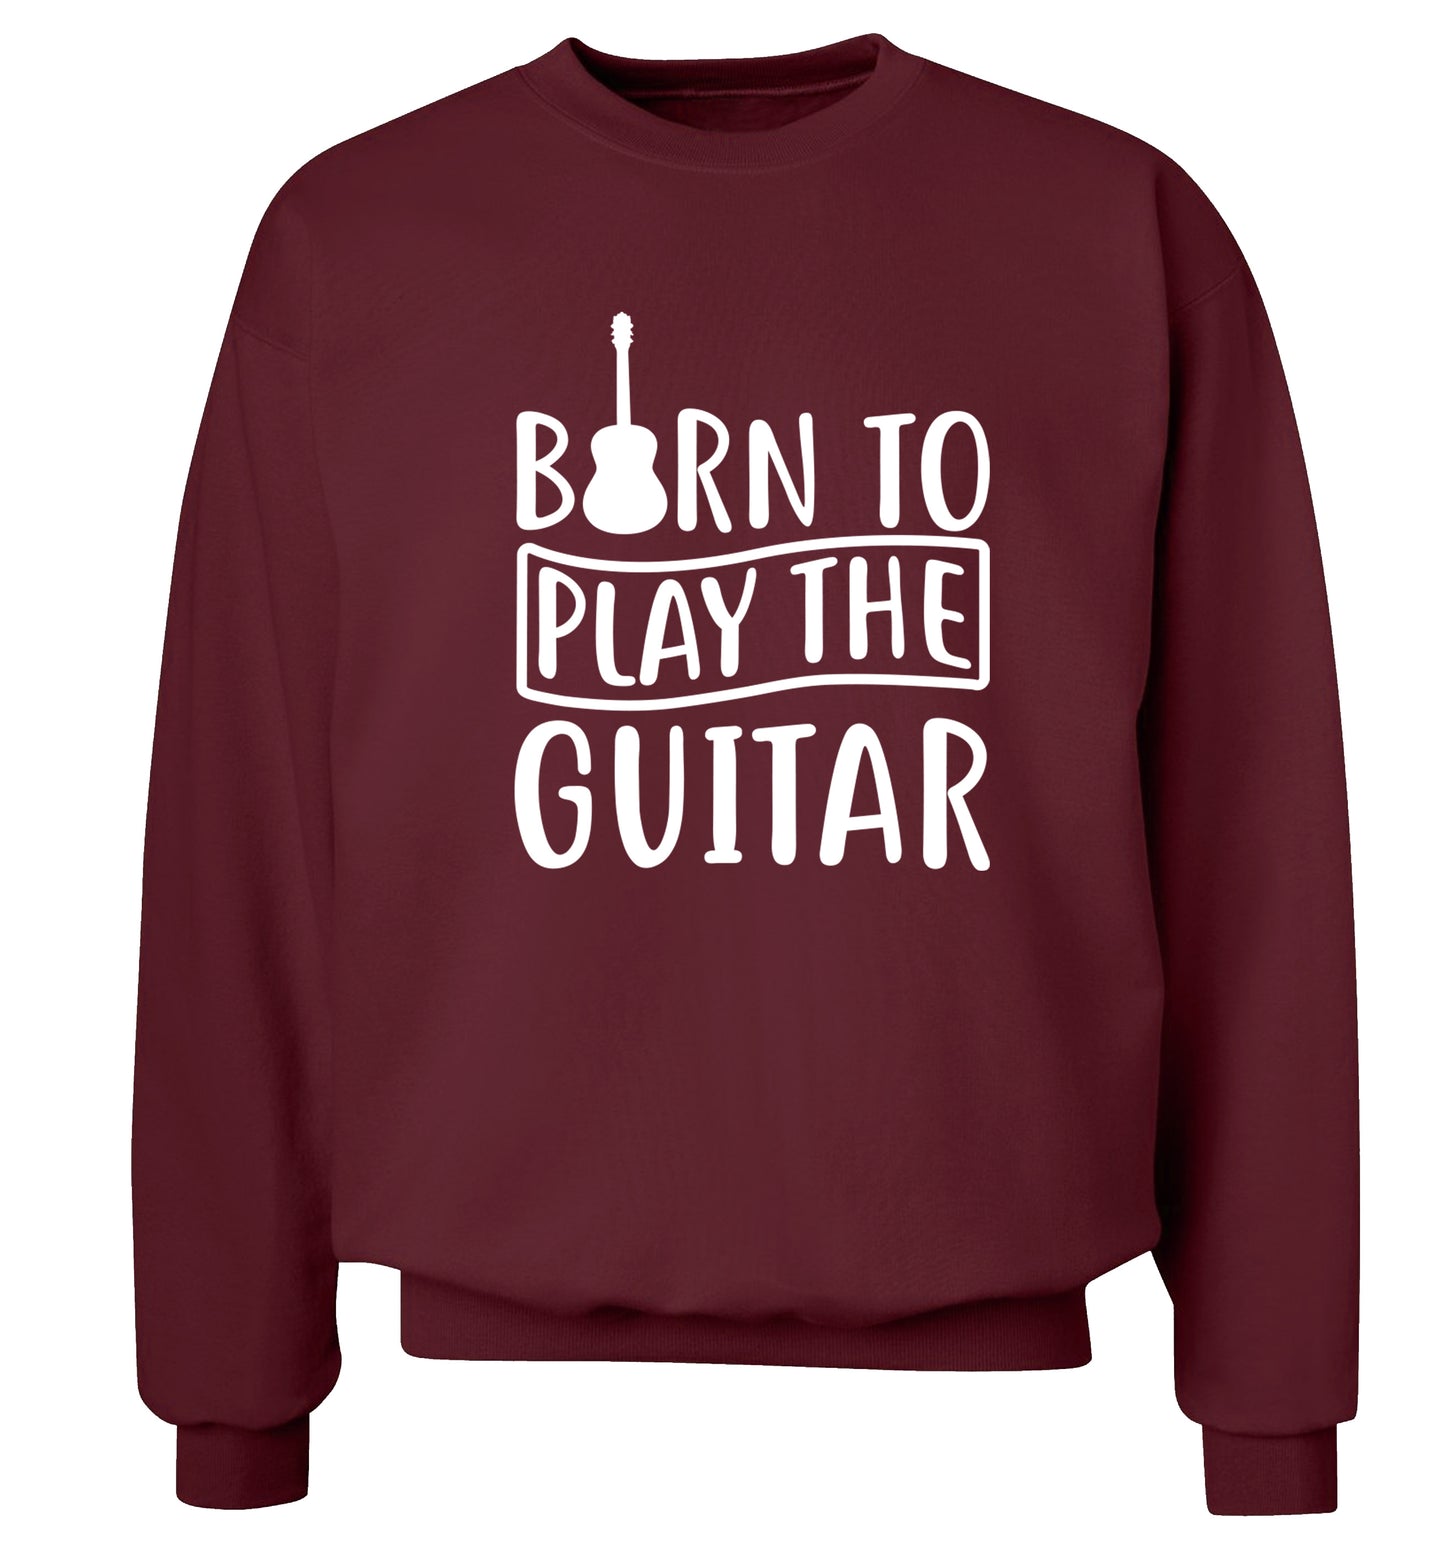 Born to play the guitar Adult's unisex maroon Sweater 2XL